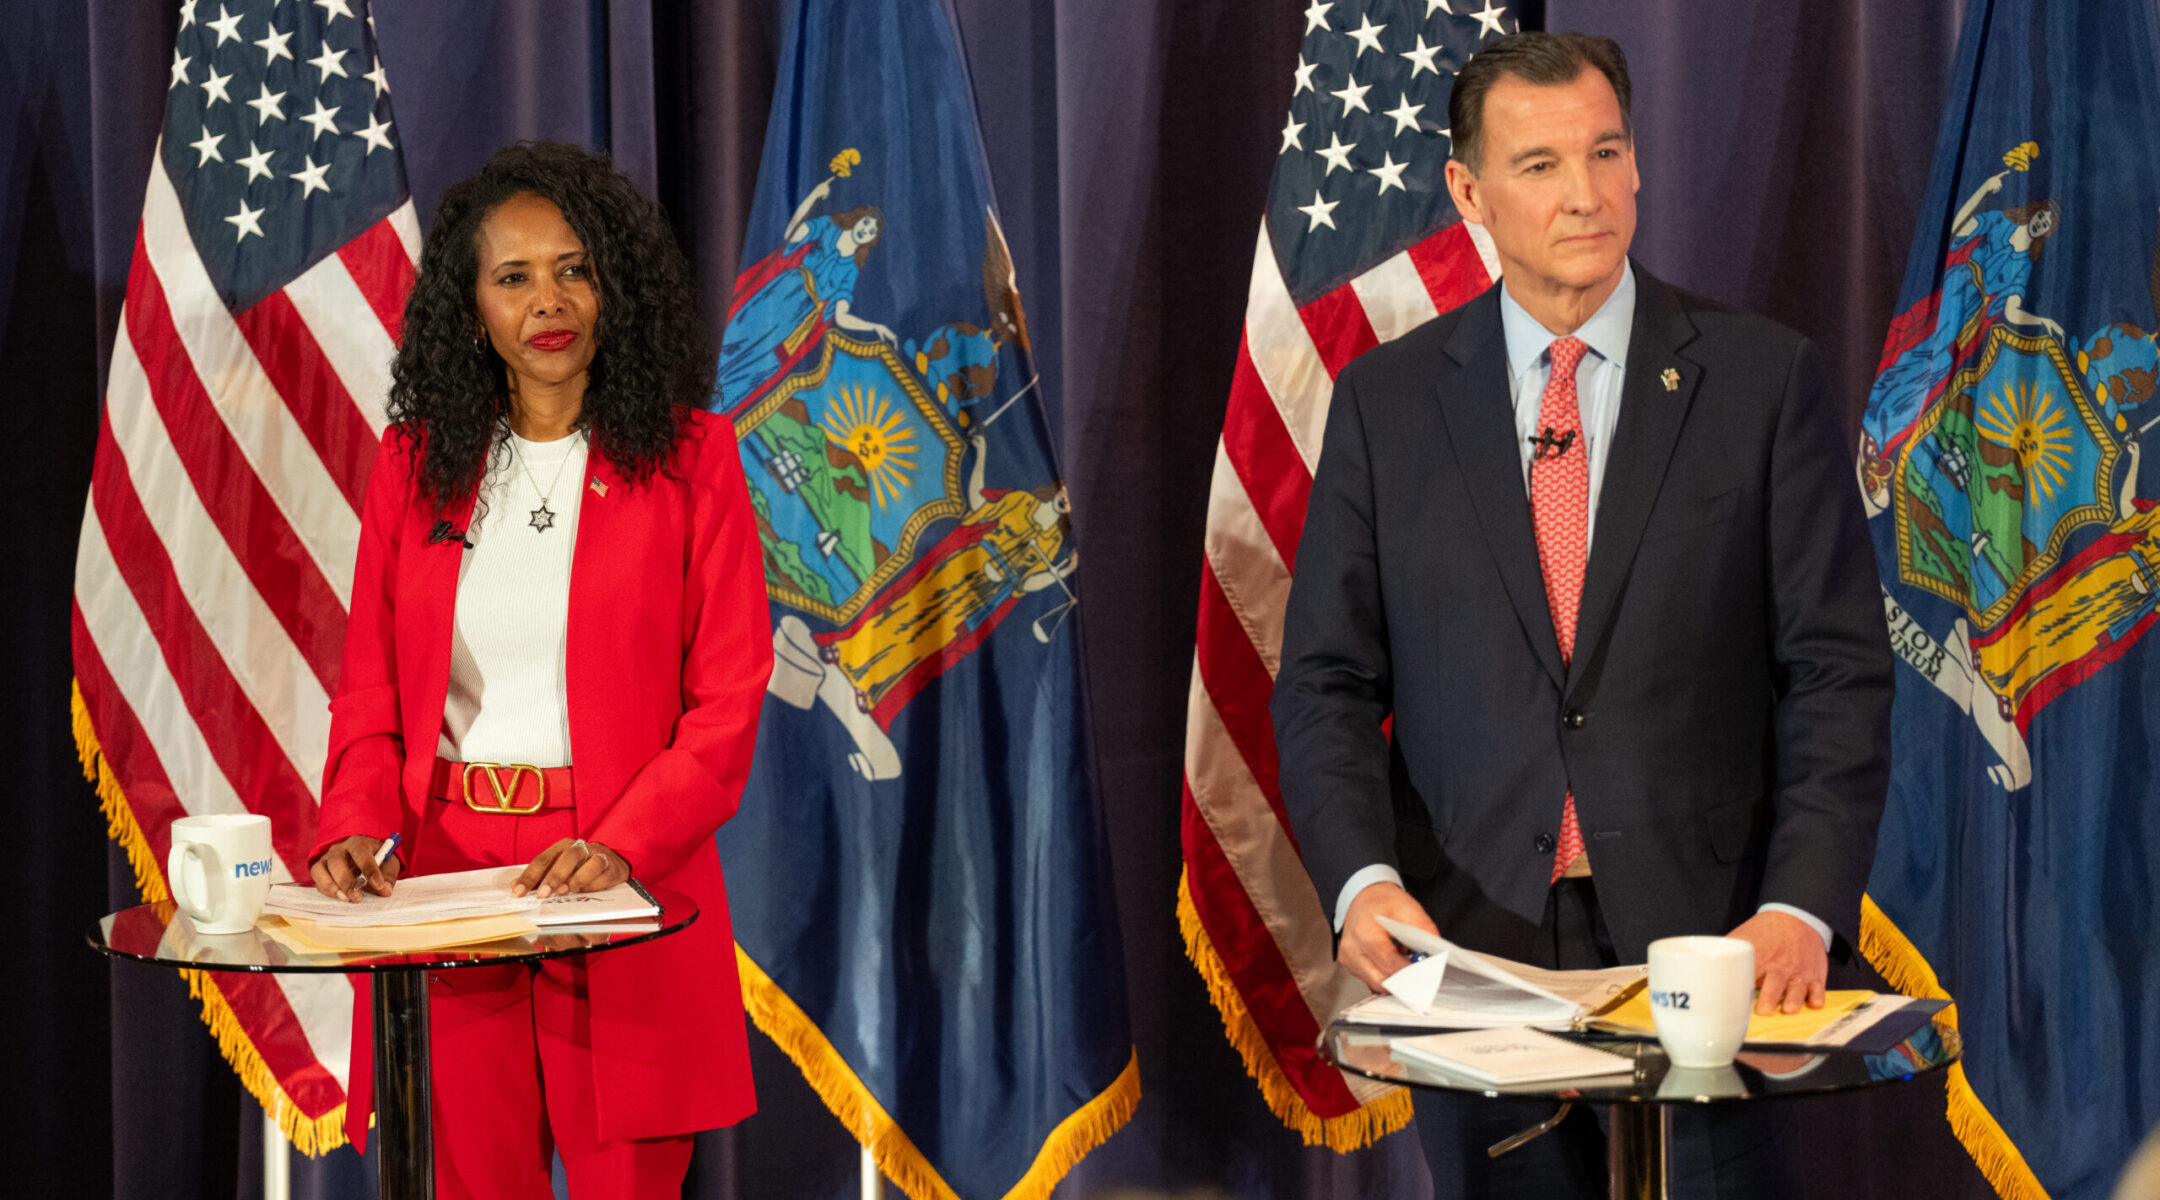 Congressional candidates Mazi Melesa Pilip, left, and Tom Suozzi, right, at a debate hosted by News 12 on Long Island, Feb. 8, 2024. (Courtesy/News 12)